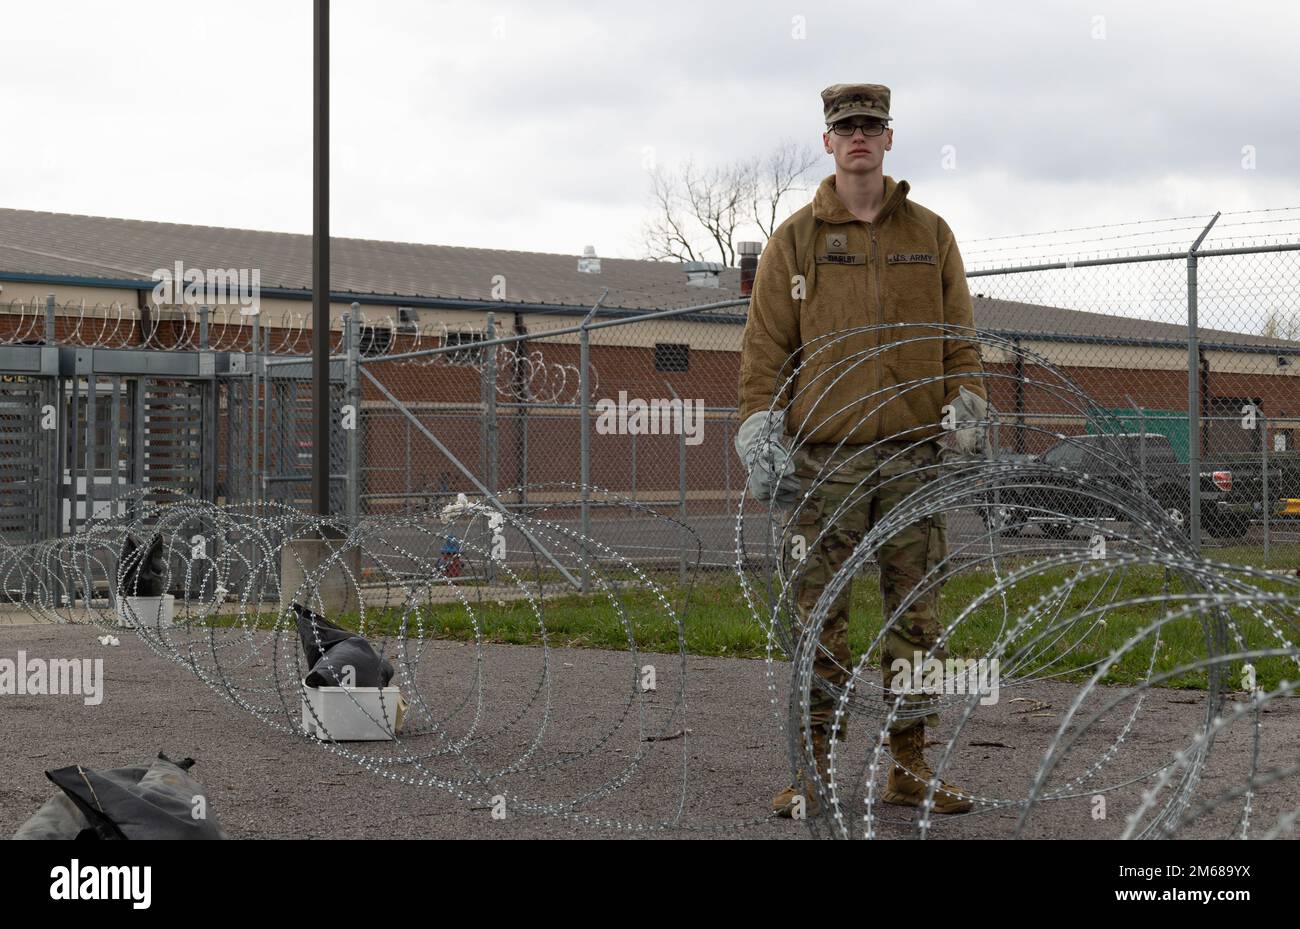 Pfc. Trevor Thurlby, help desk technician, 1st Theater Sustainment Command, lays concertina wire during a command post exercise at Fort Knox, Kentucky, April 18, 2022. Command post exercises are conducted to increase readiness of Soldiers. Stock Photo